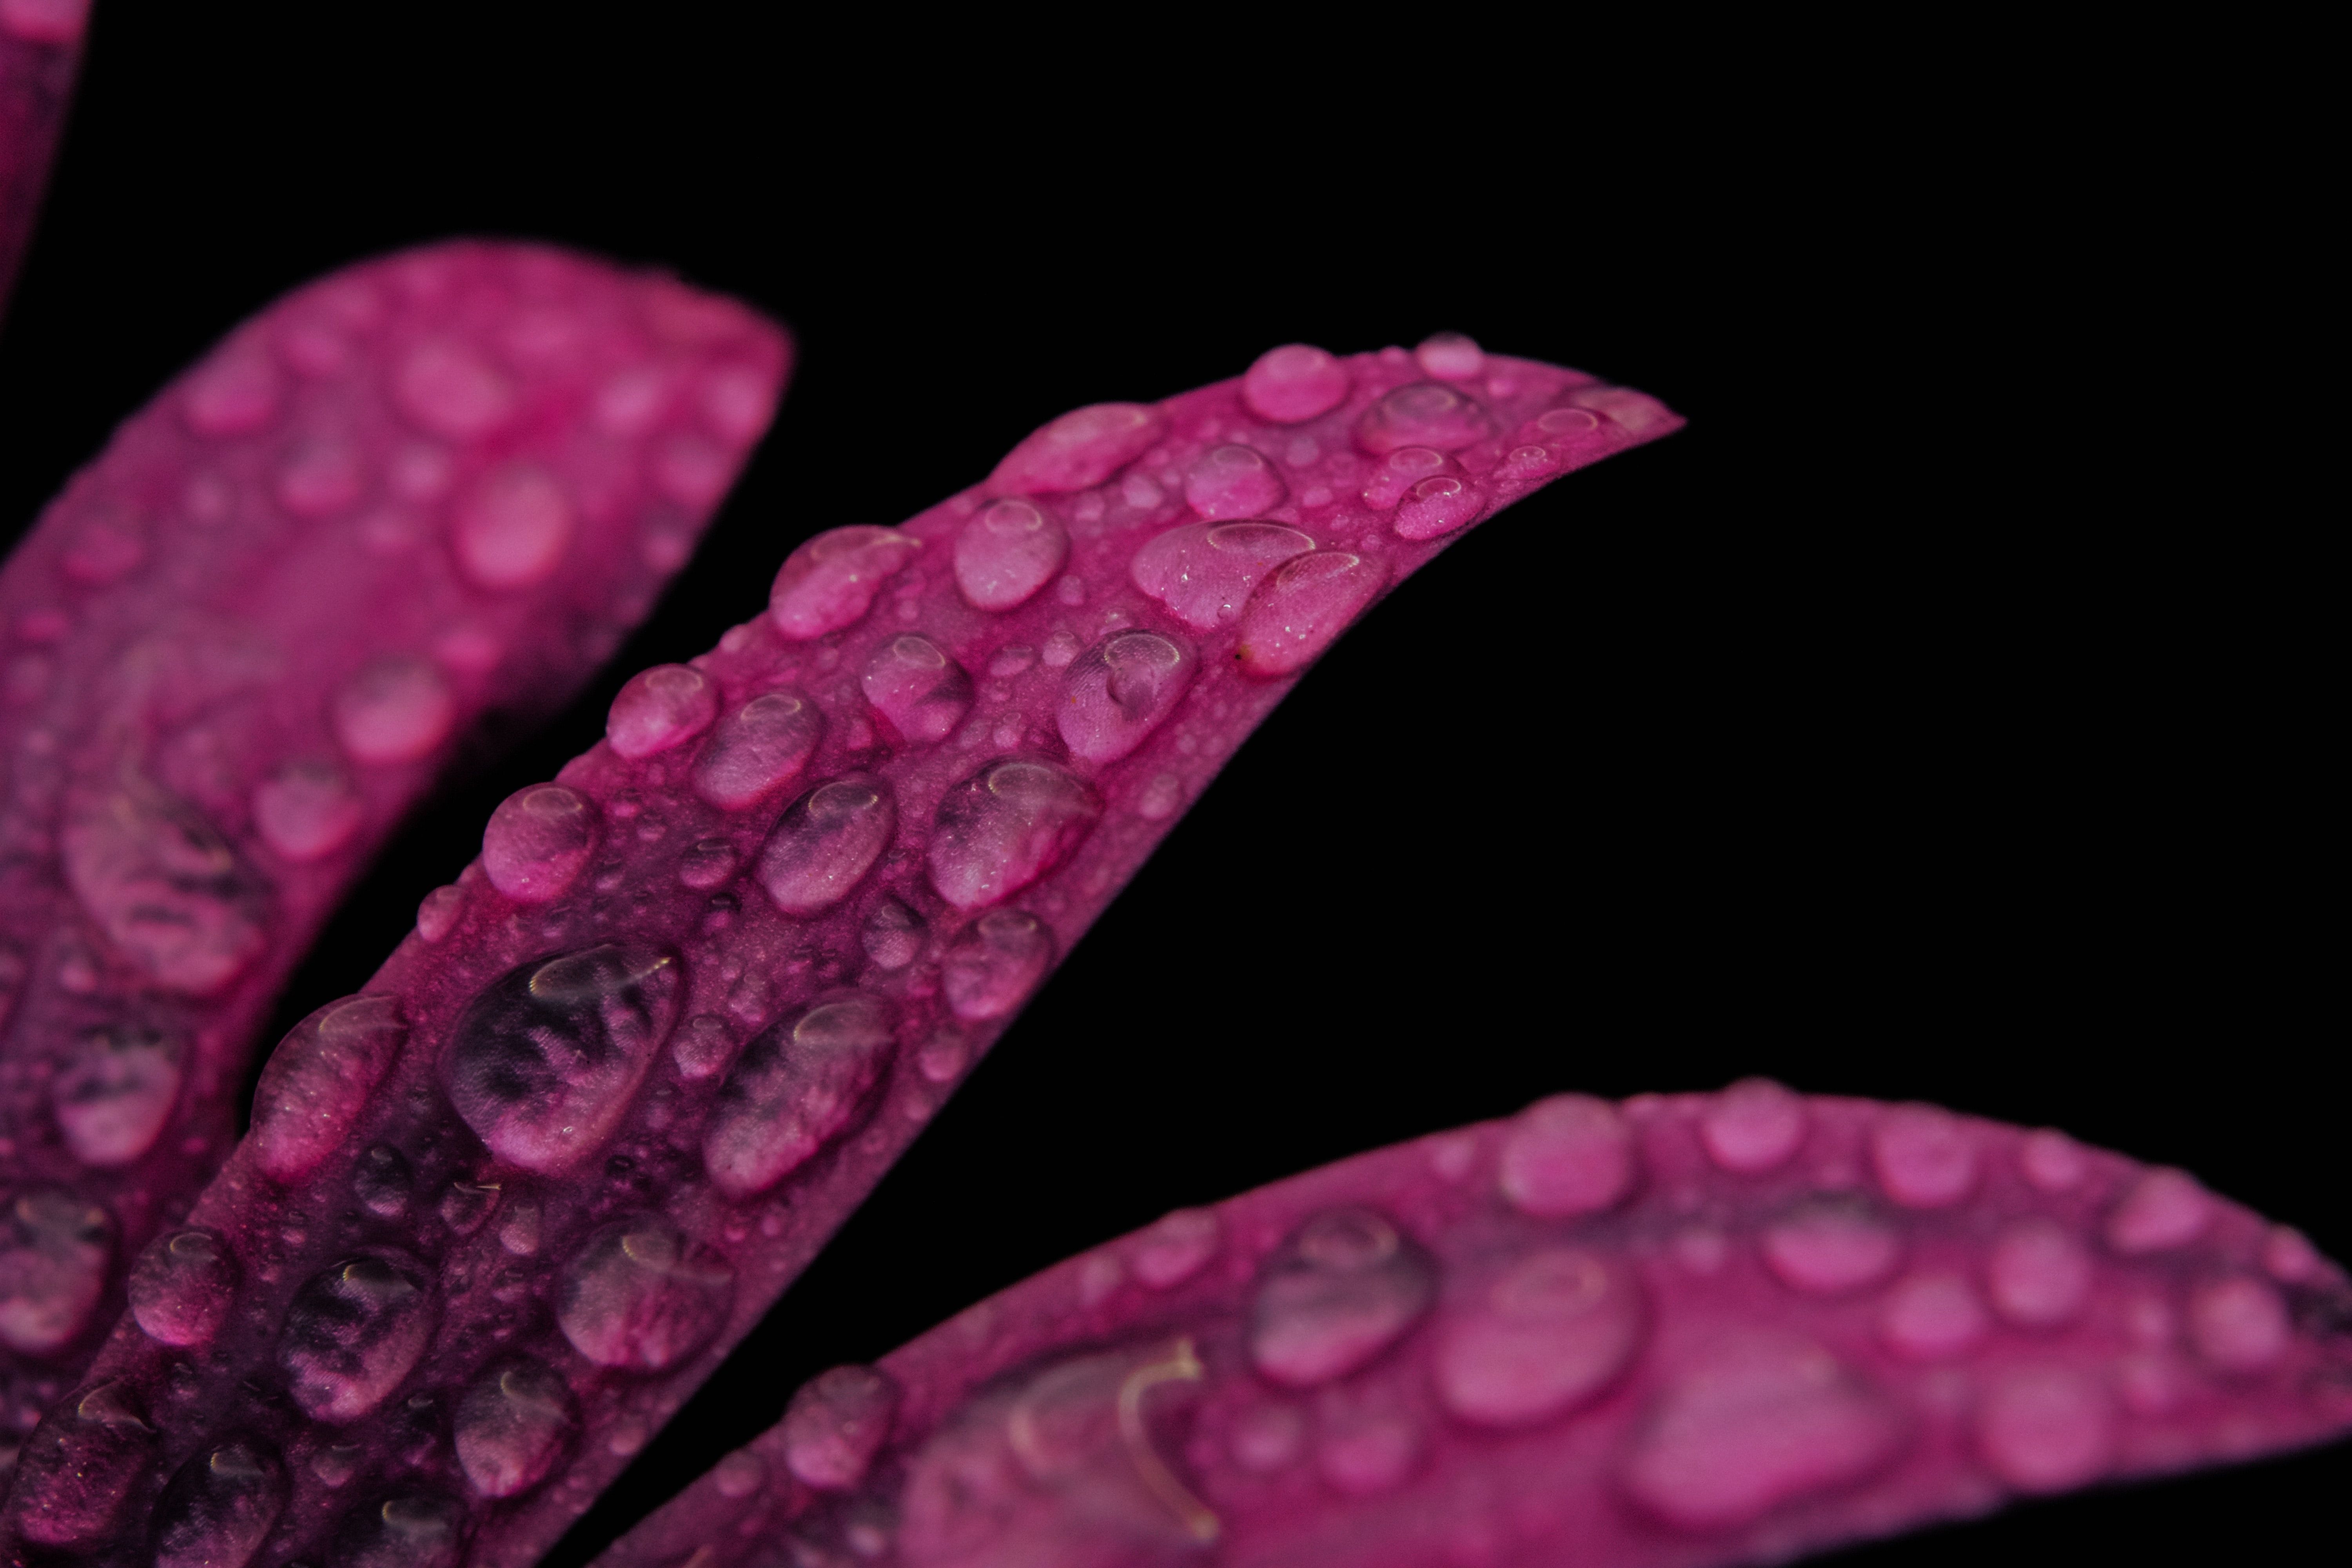 close-up photo of a plant with water droplets